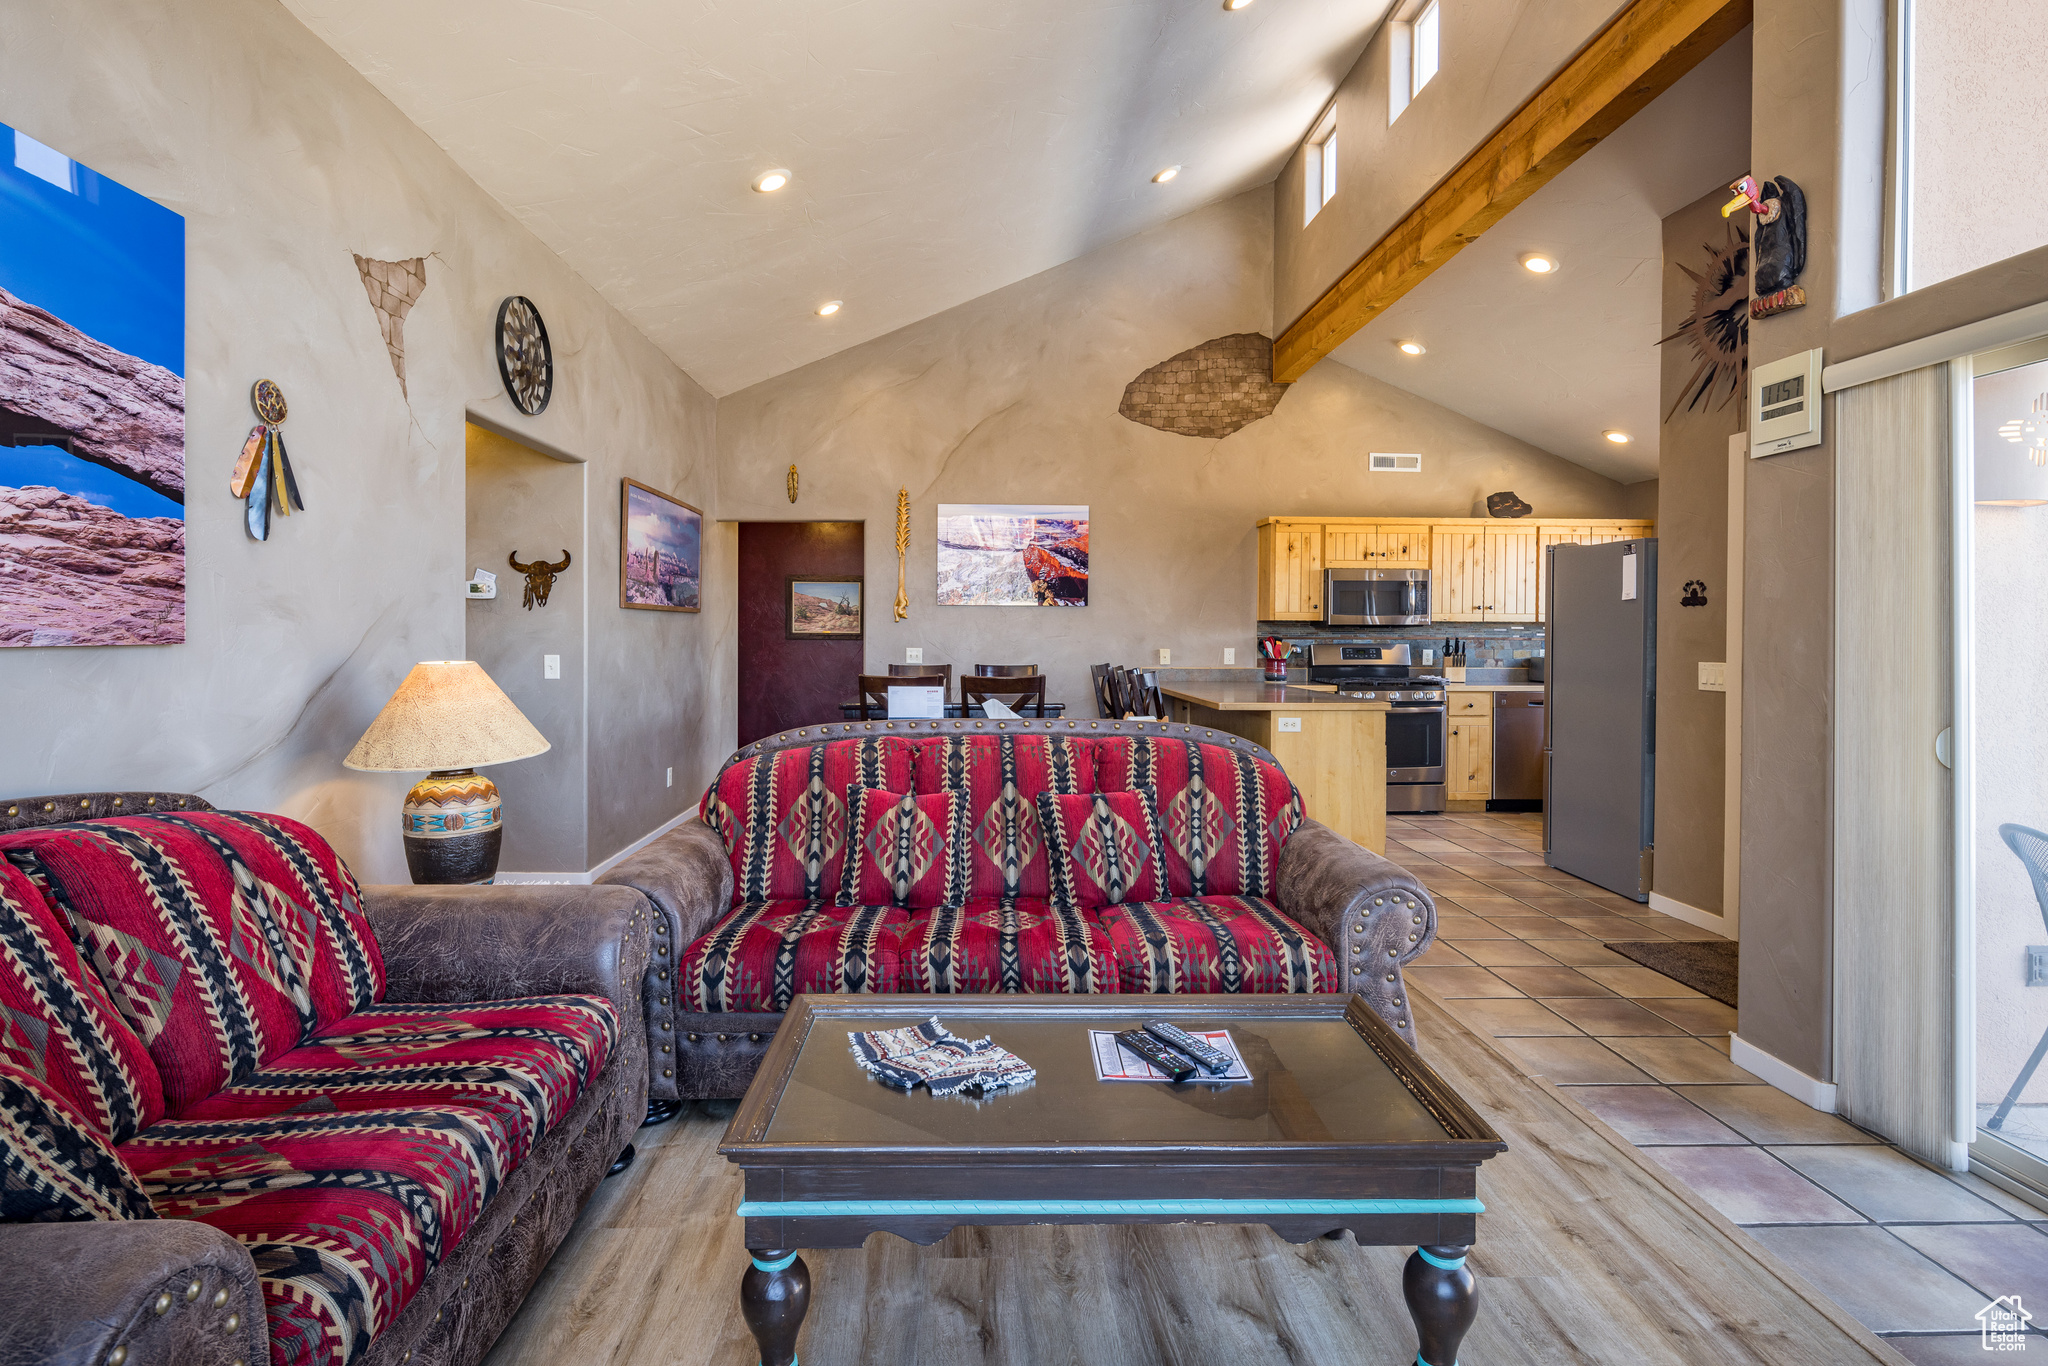 3686 S SPANISH VALLEY #E1, Moab, Utah 84532, 3 Bedrooms Bedrooms, 10 Rooms Rooms,2 BathroomsBathrooms,Residential,For sale,SPANISH VALLEY,1864390